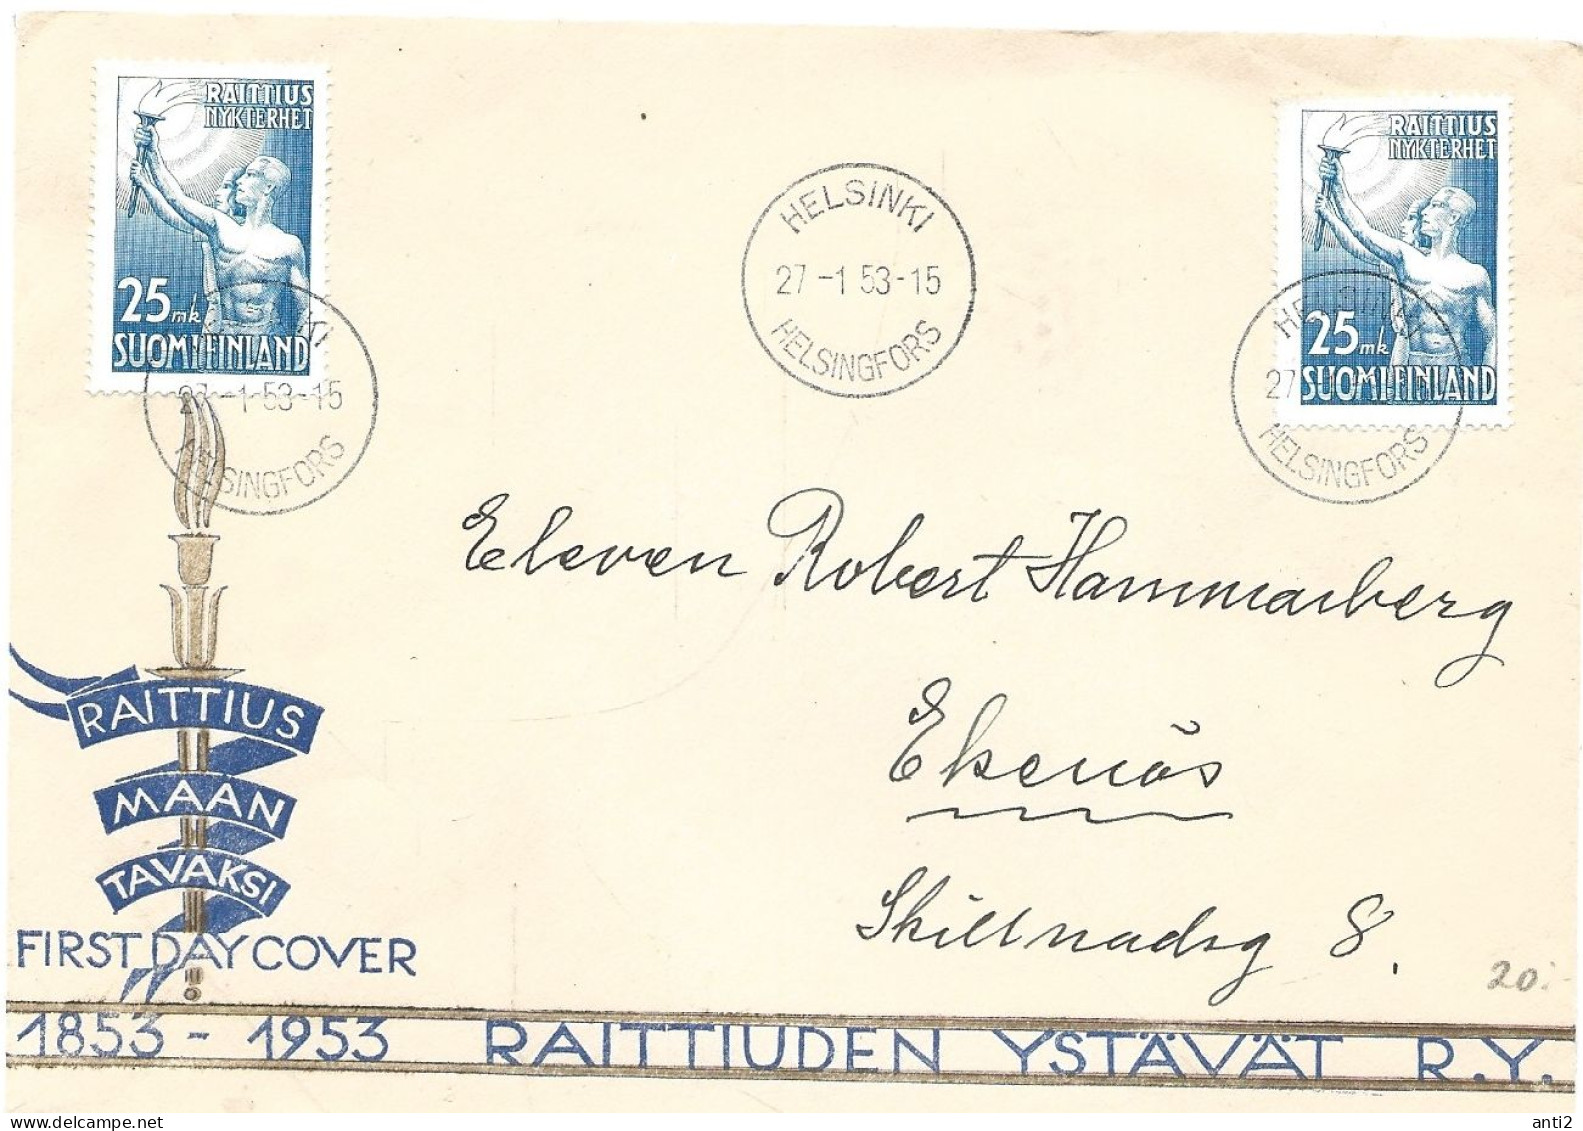 Finland   1953  Centenary Of The Anti-Alcohol Movement In Finland  Mi 416 FDC - Covers & Documents